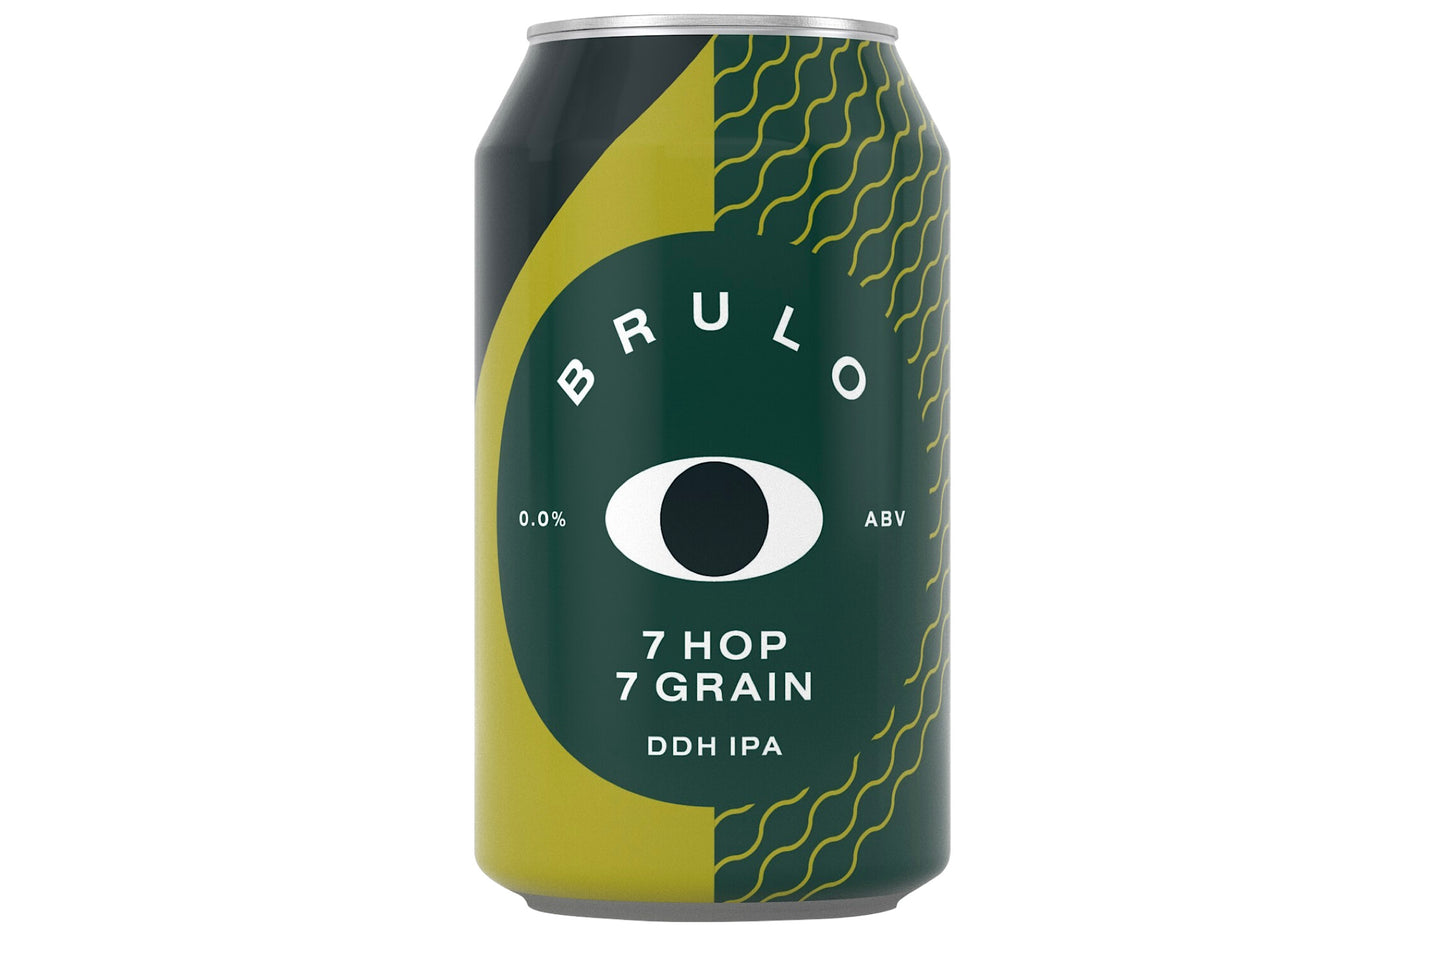 Brulo 7 HOP 7 GRAIN DDH IPA Alcohol Free |0.0%| 330ml Can